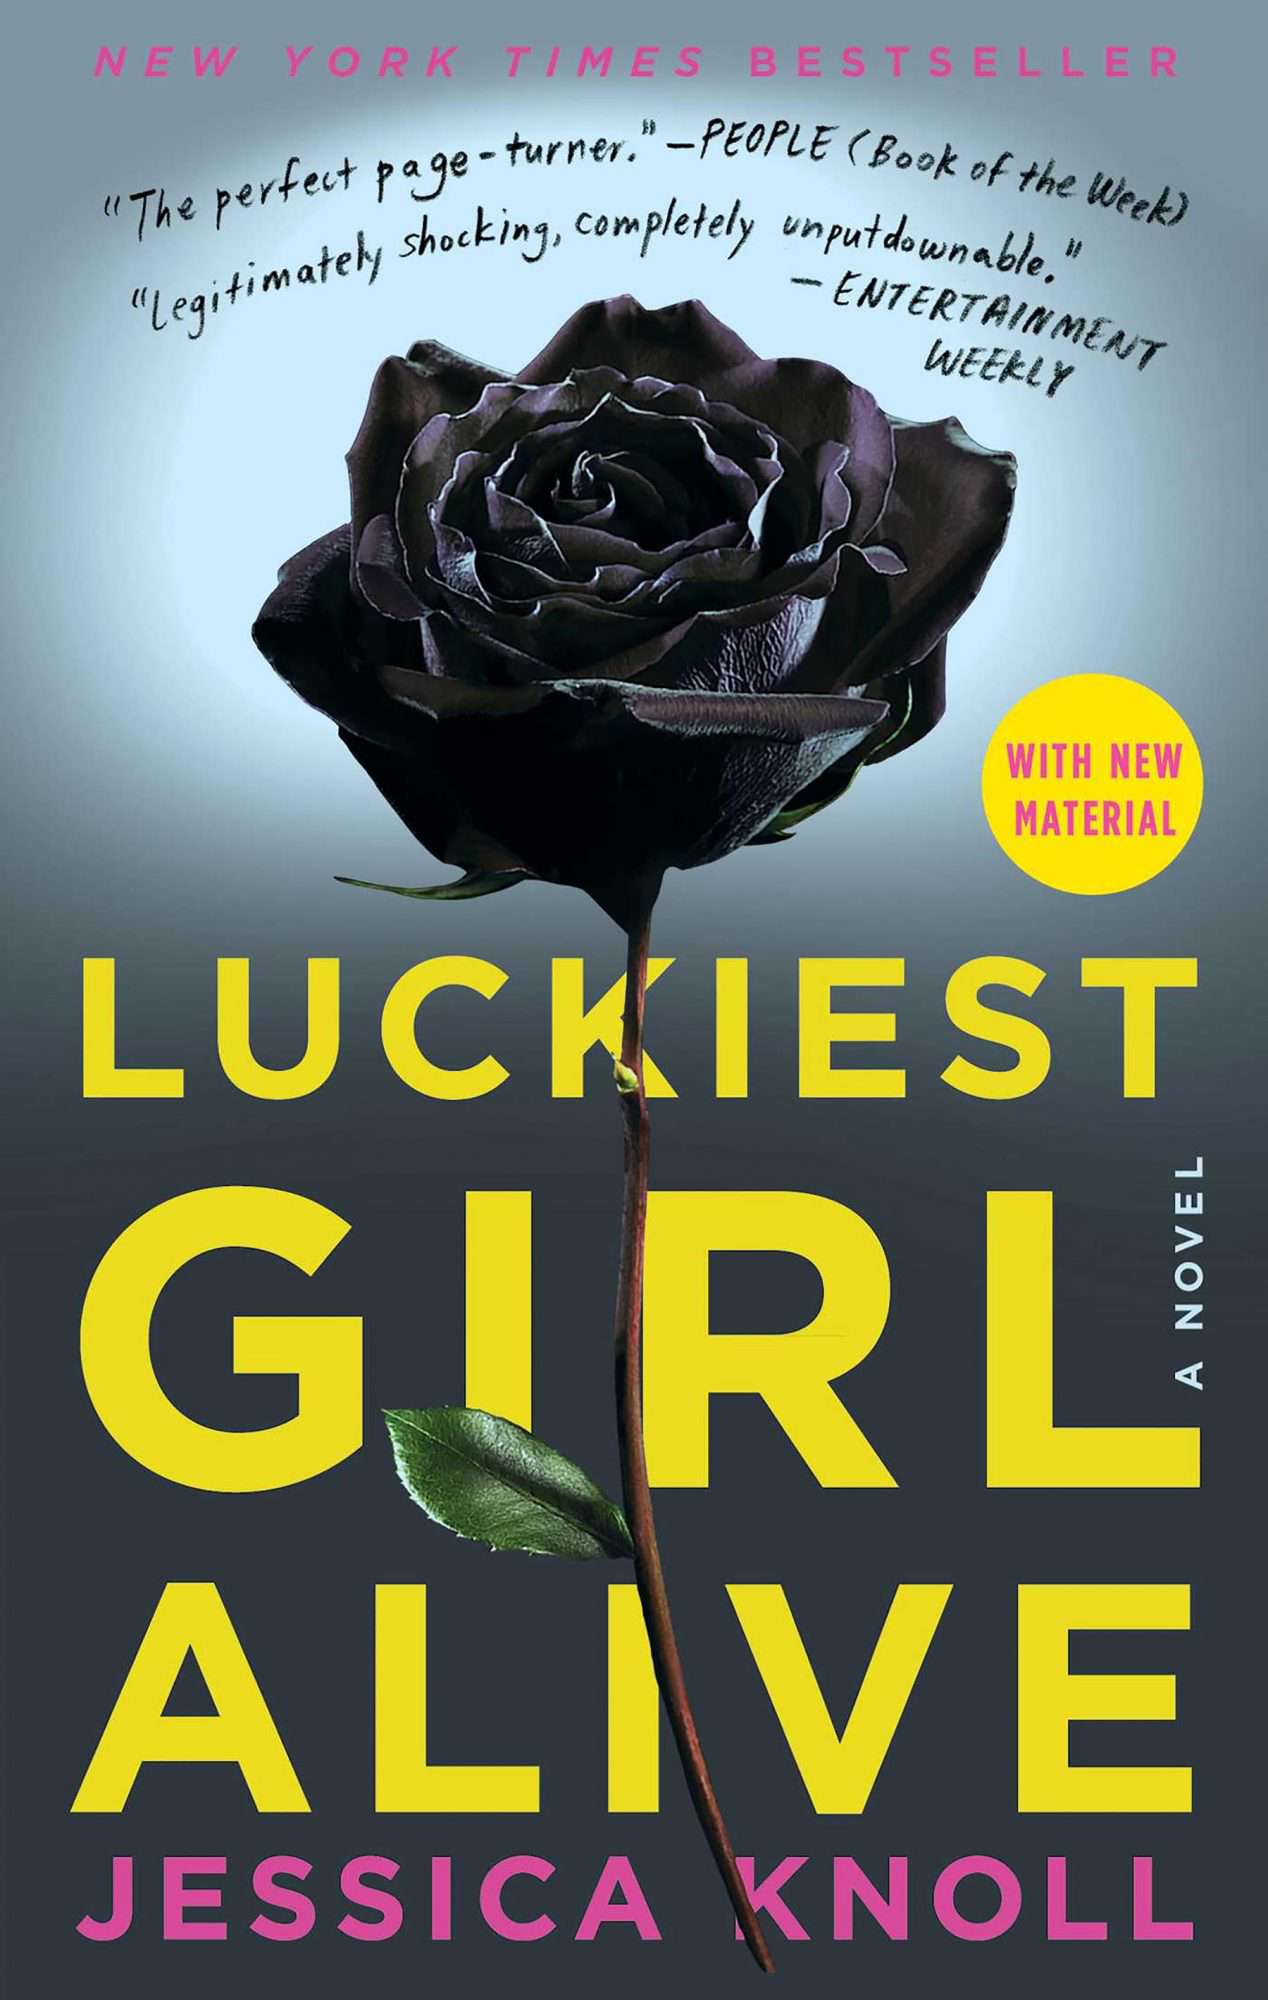 Luckiest Girl Alive by Jessica Knoll CR: Simon & Schuster